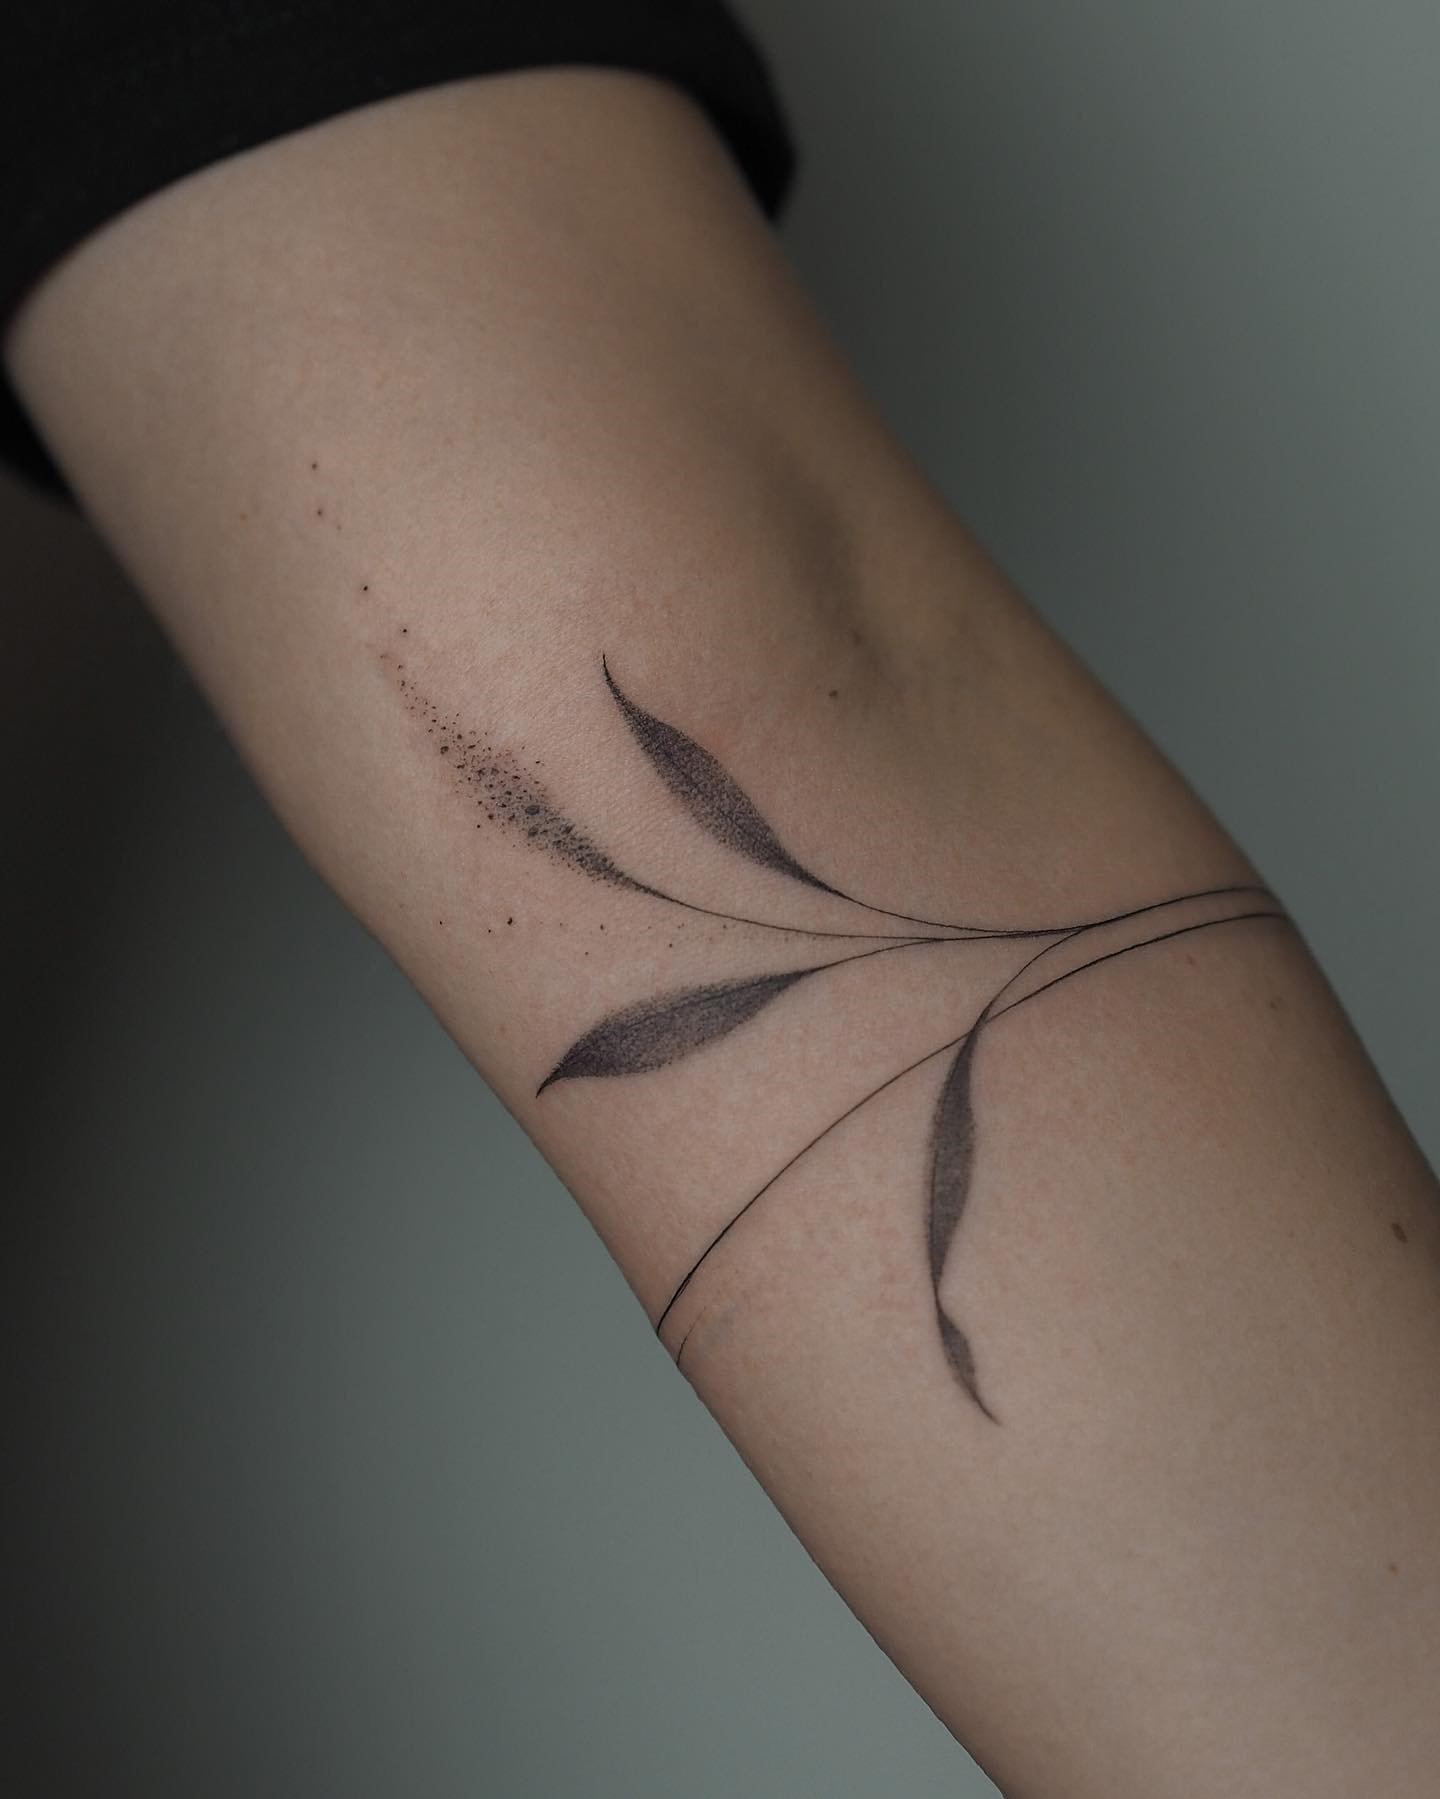 30 Meaningful and Beautiful Tattoo Ideas For Women